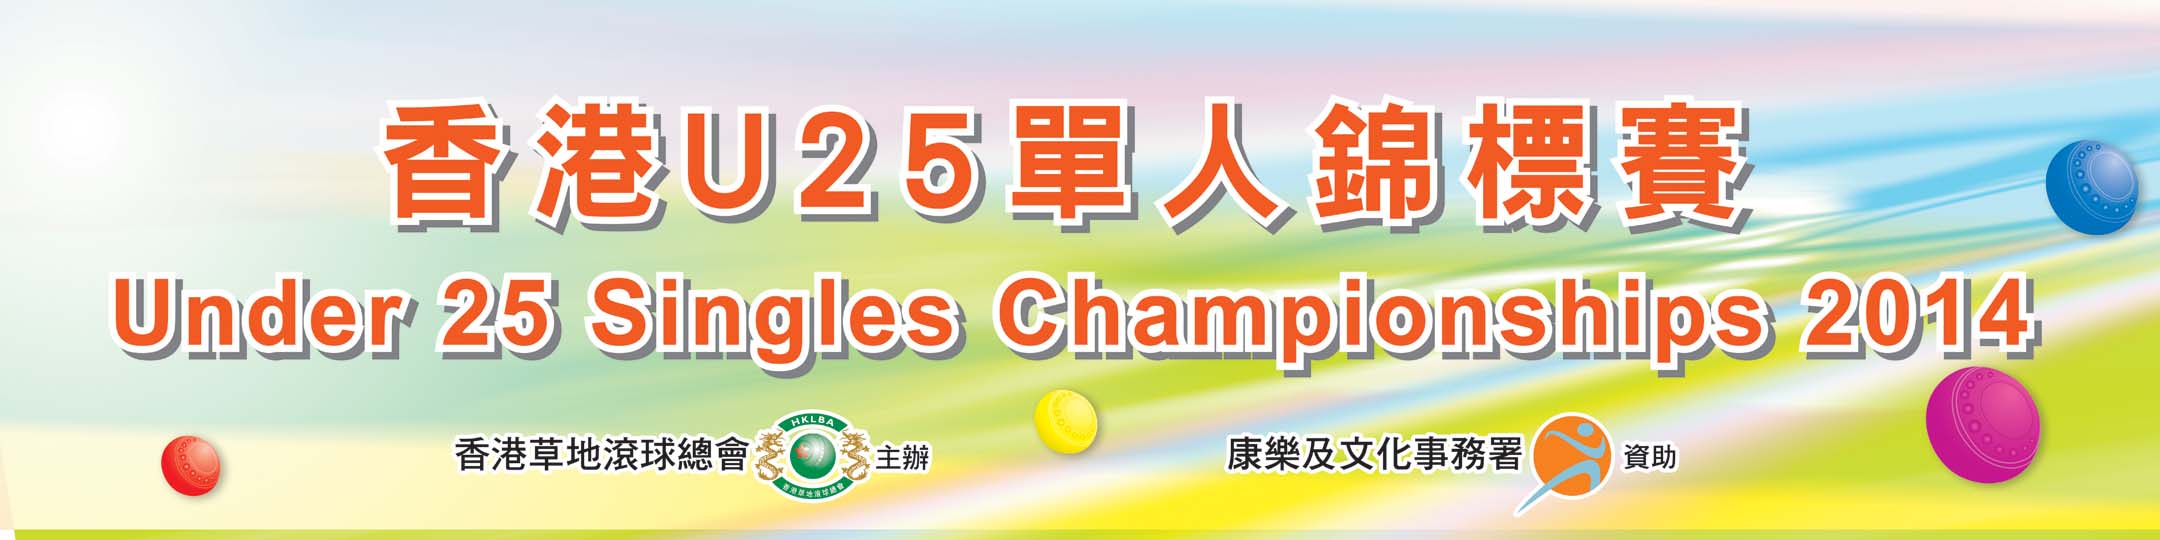 Under 25 Singles Championship 2014 (Updated on 1/12/14)